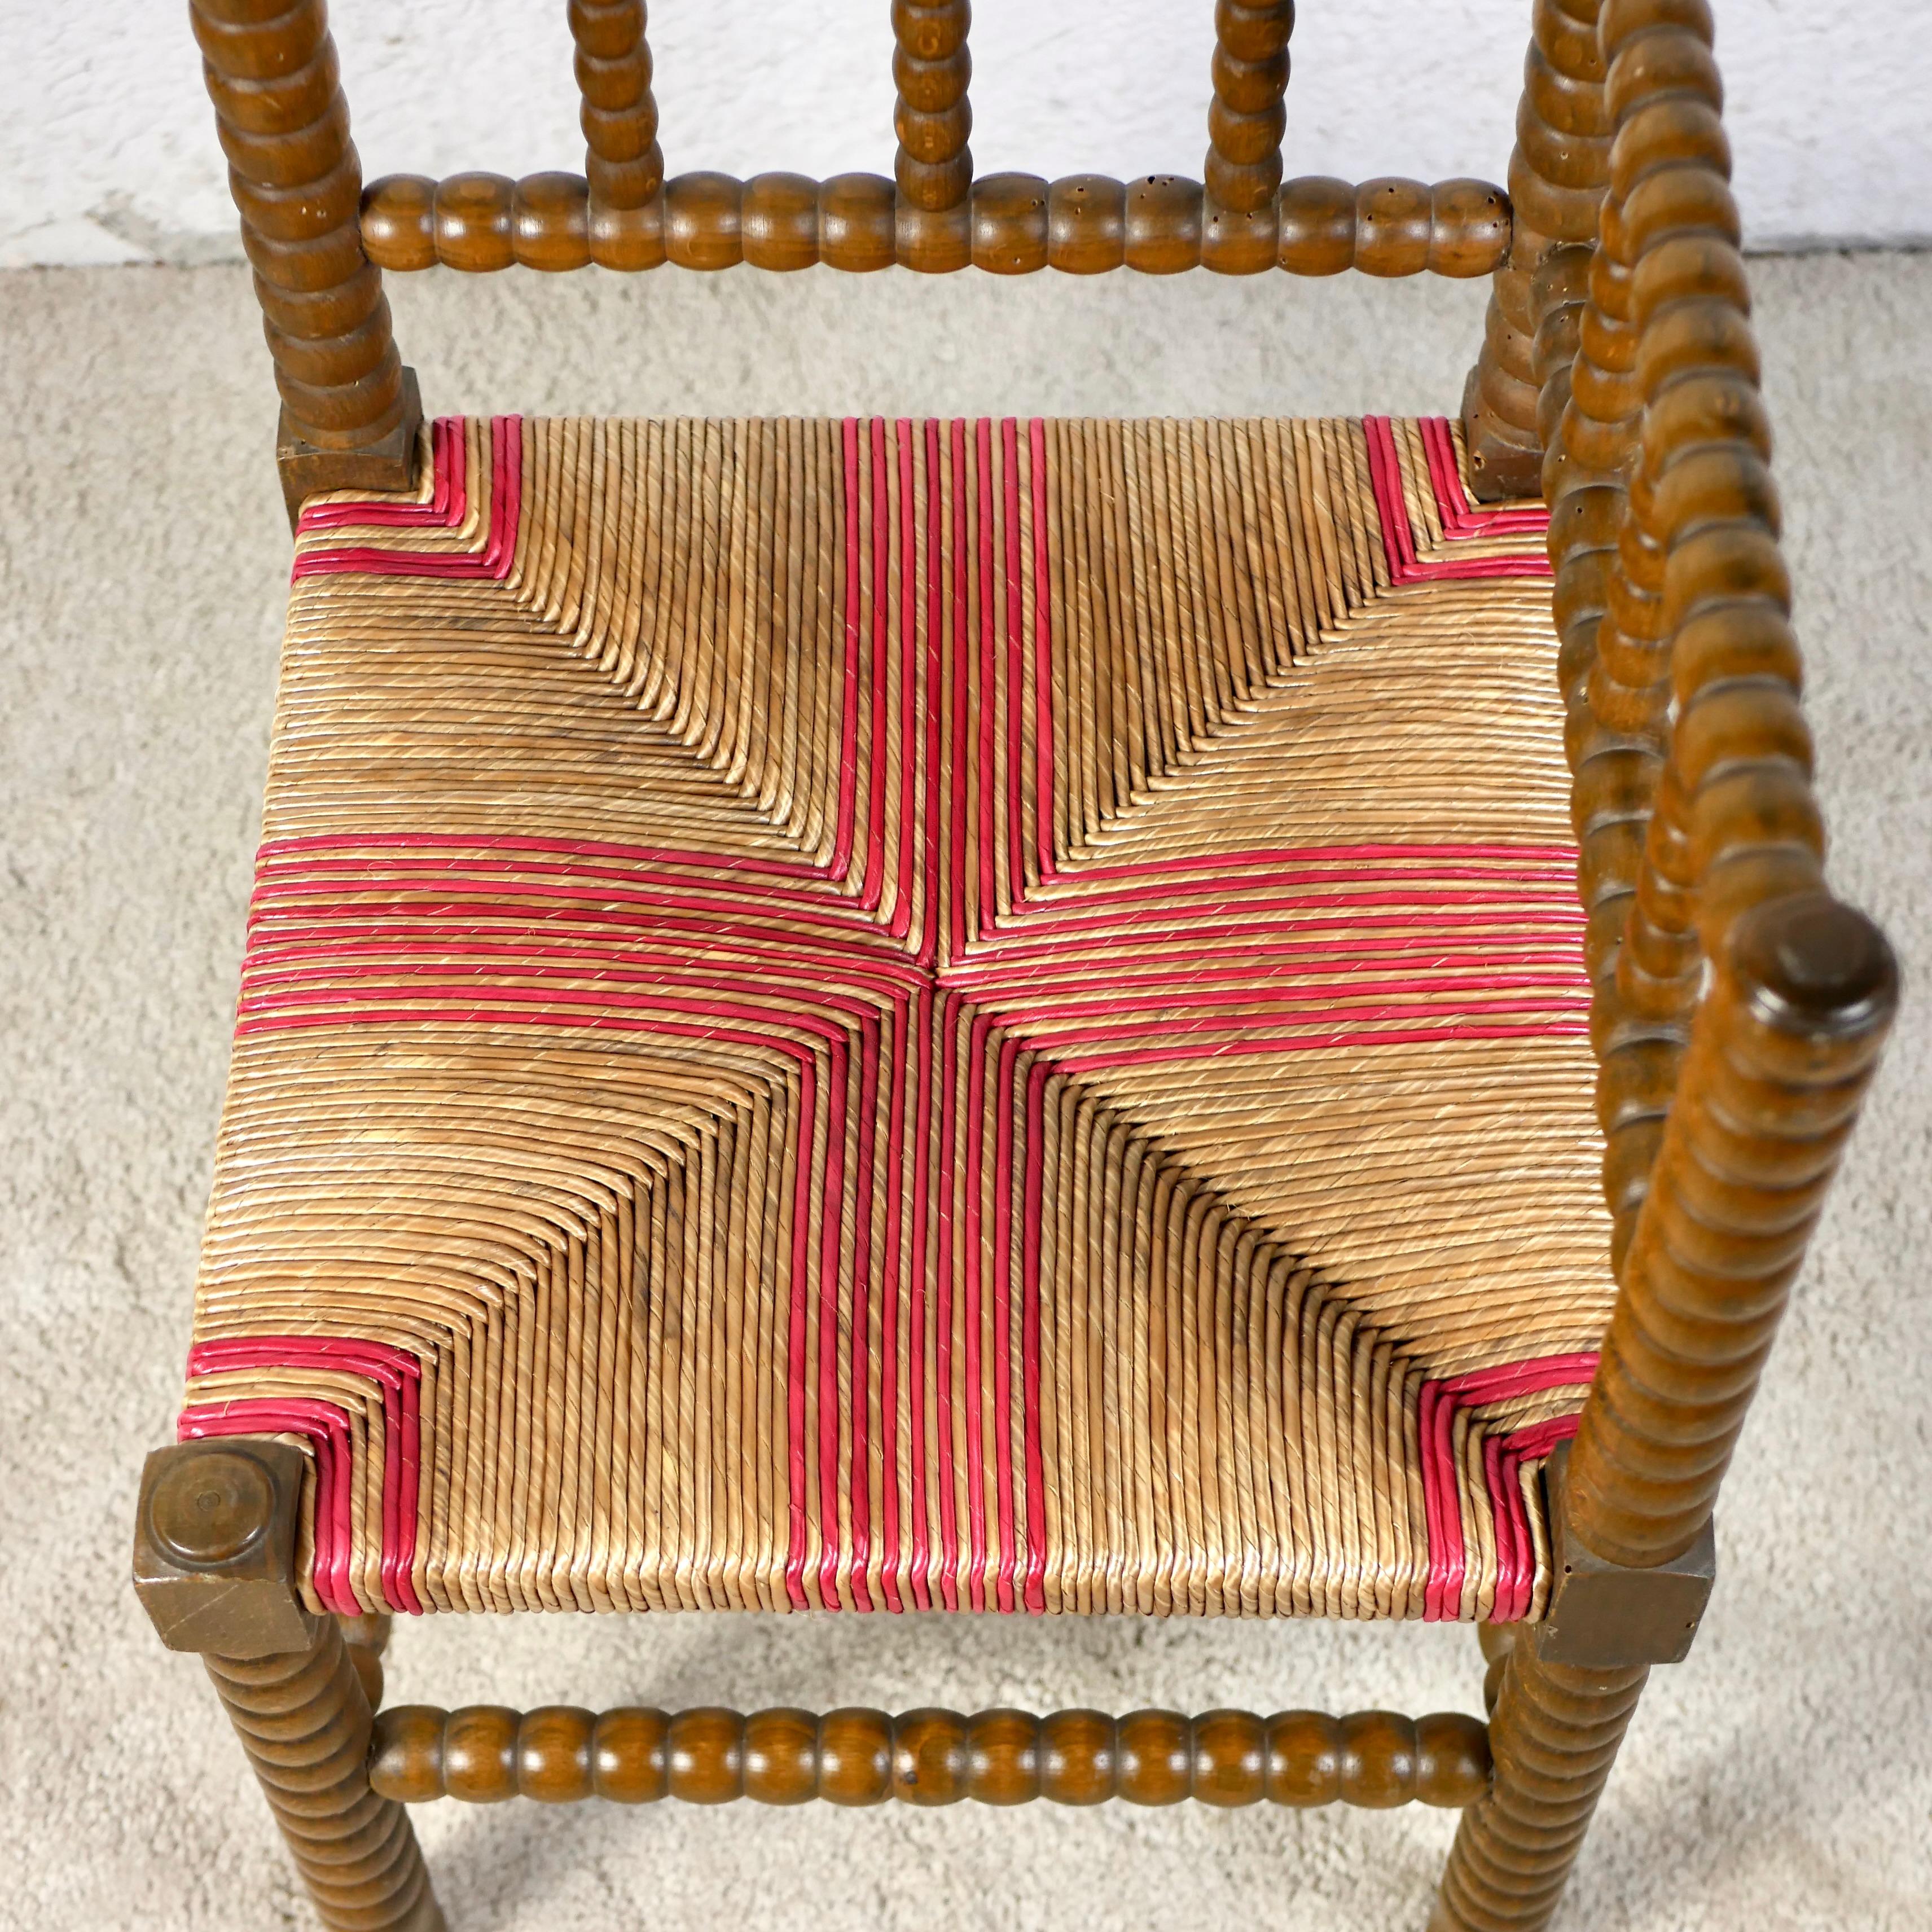 Pair of Bobbin corner chairs, wood and straw, France, early 20th century For Sale 4